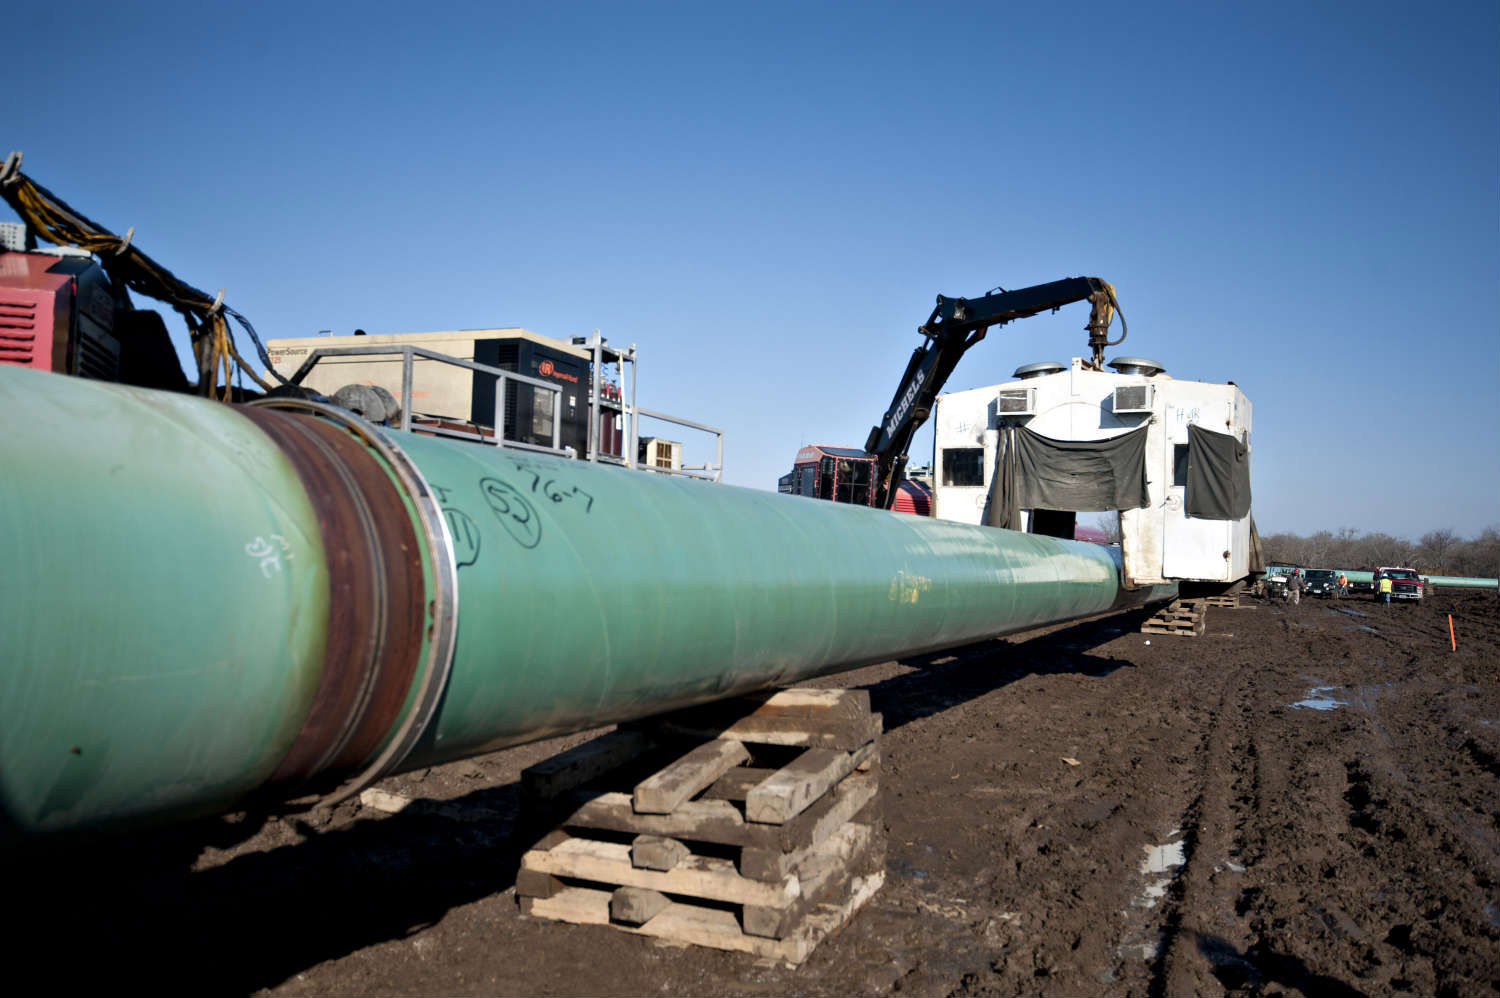 While one section of the Keystone pipeline is under construction, it's up to President Obama to decide if the full project will go forward (Daniel Acker/Bloomberg via Getty Images)